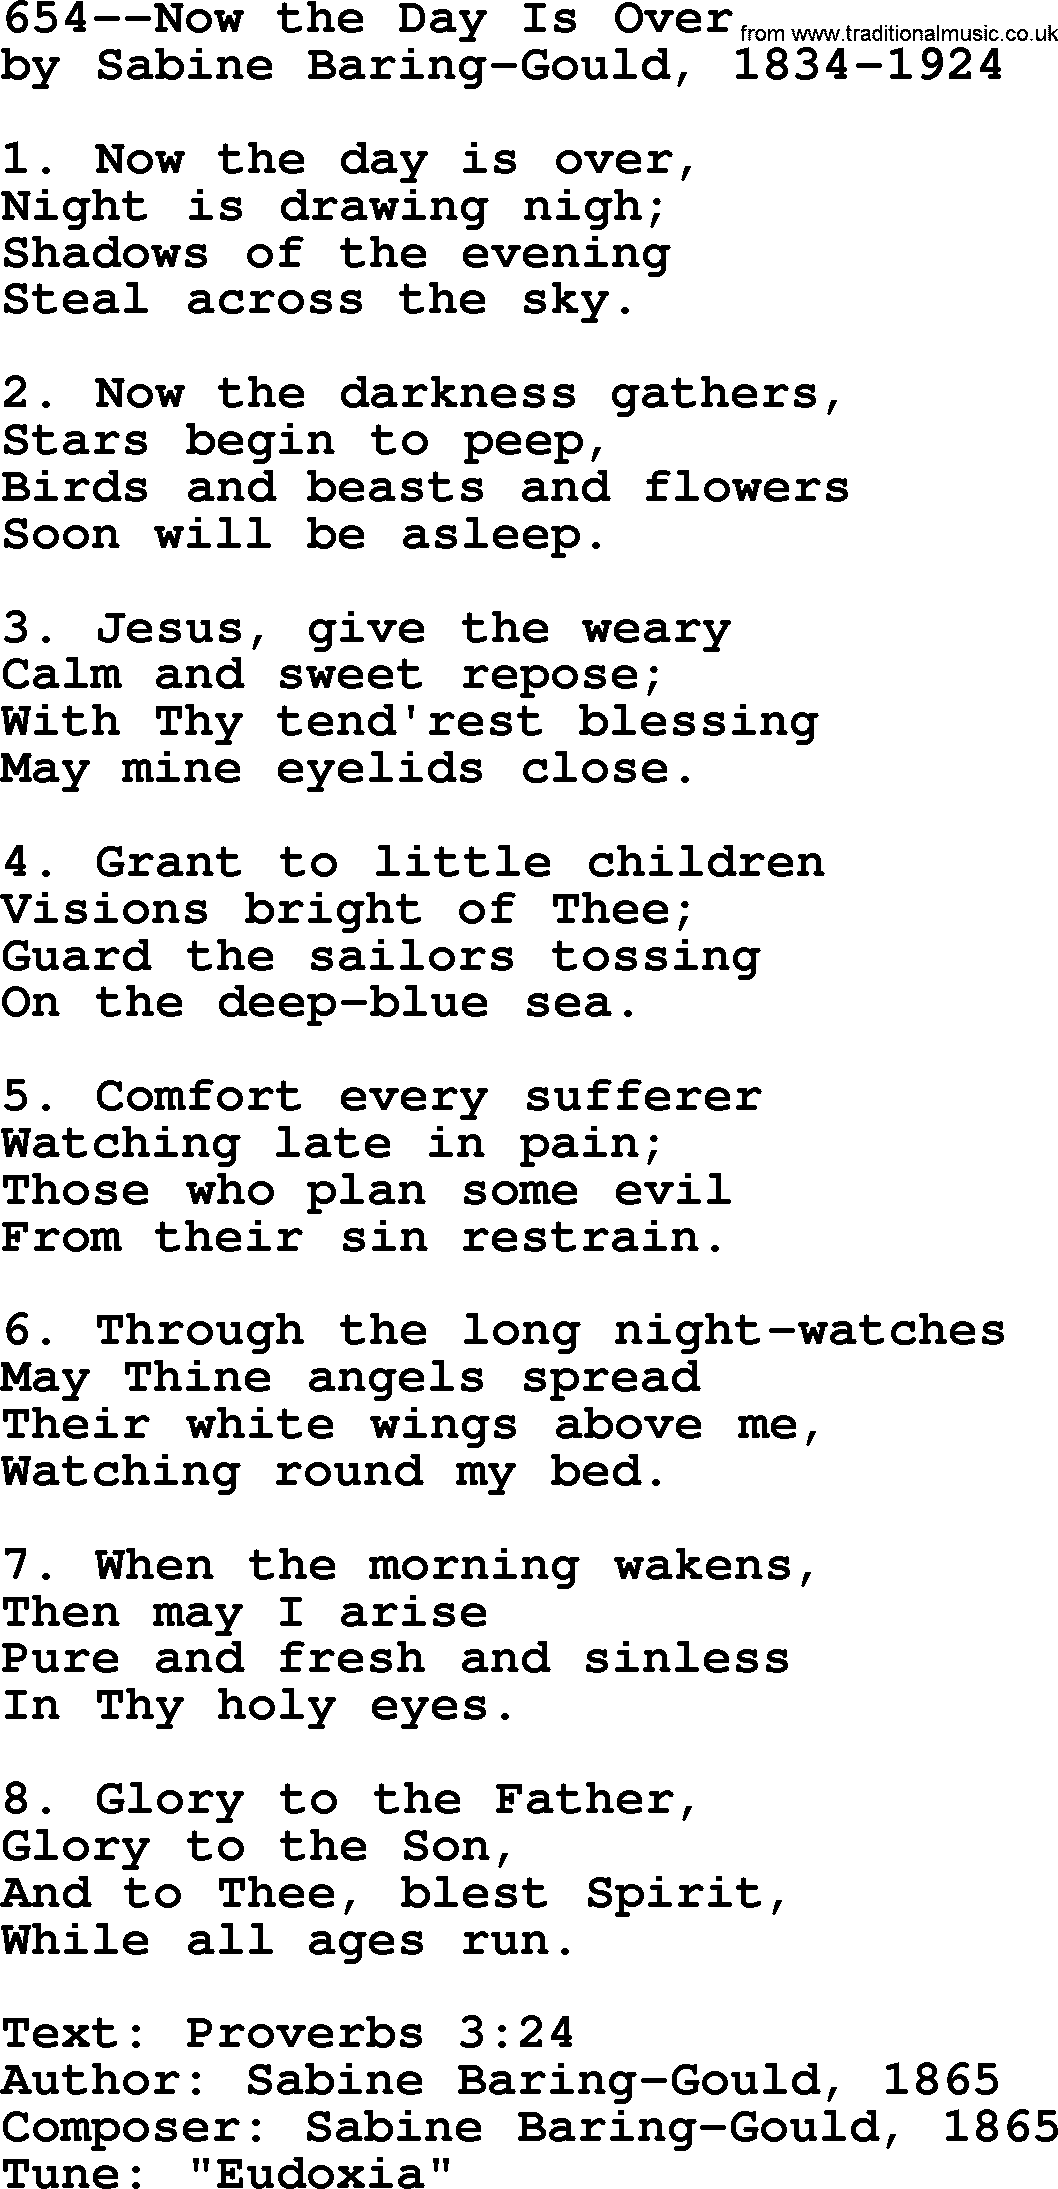 Lutheran Hymn: 654--Now the Day Is Over.txt lyrics with PDF